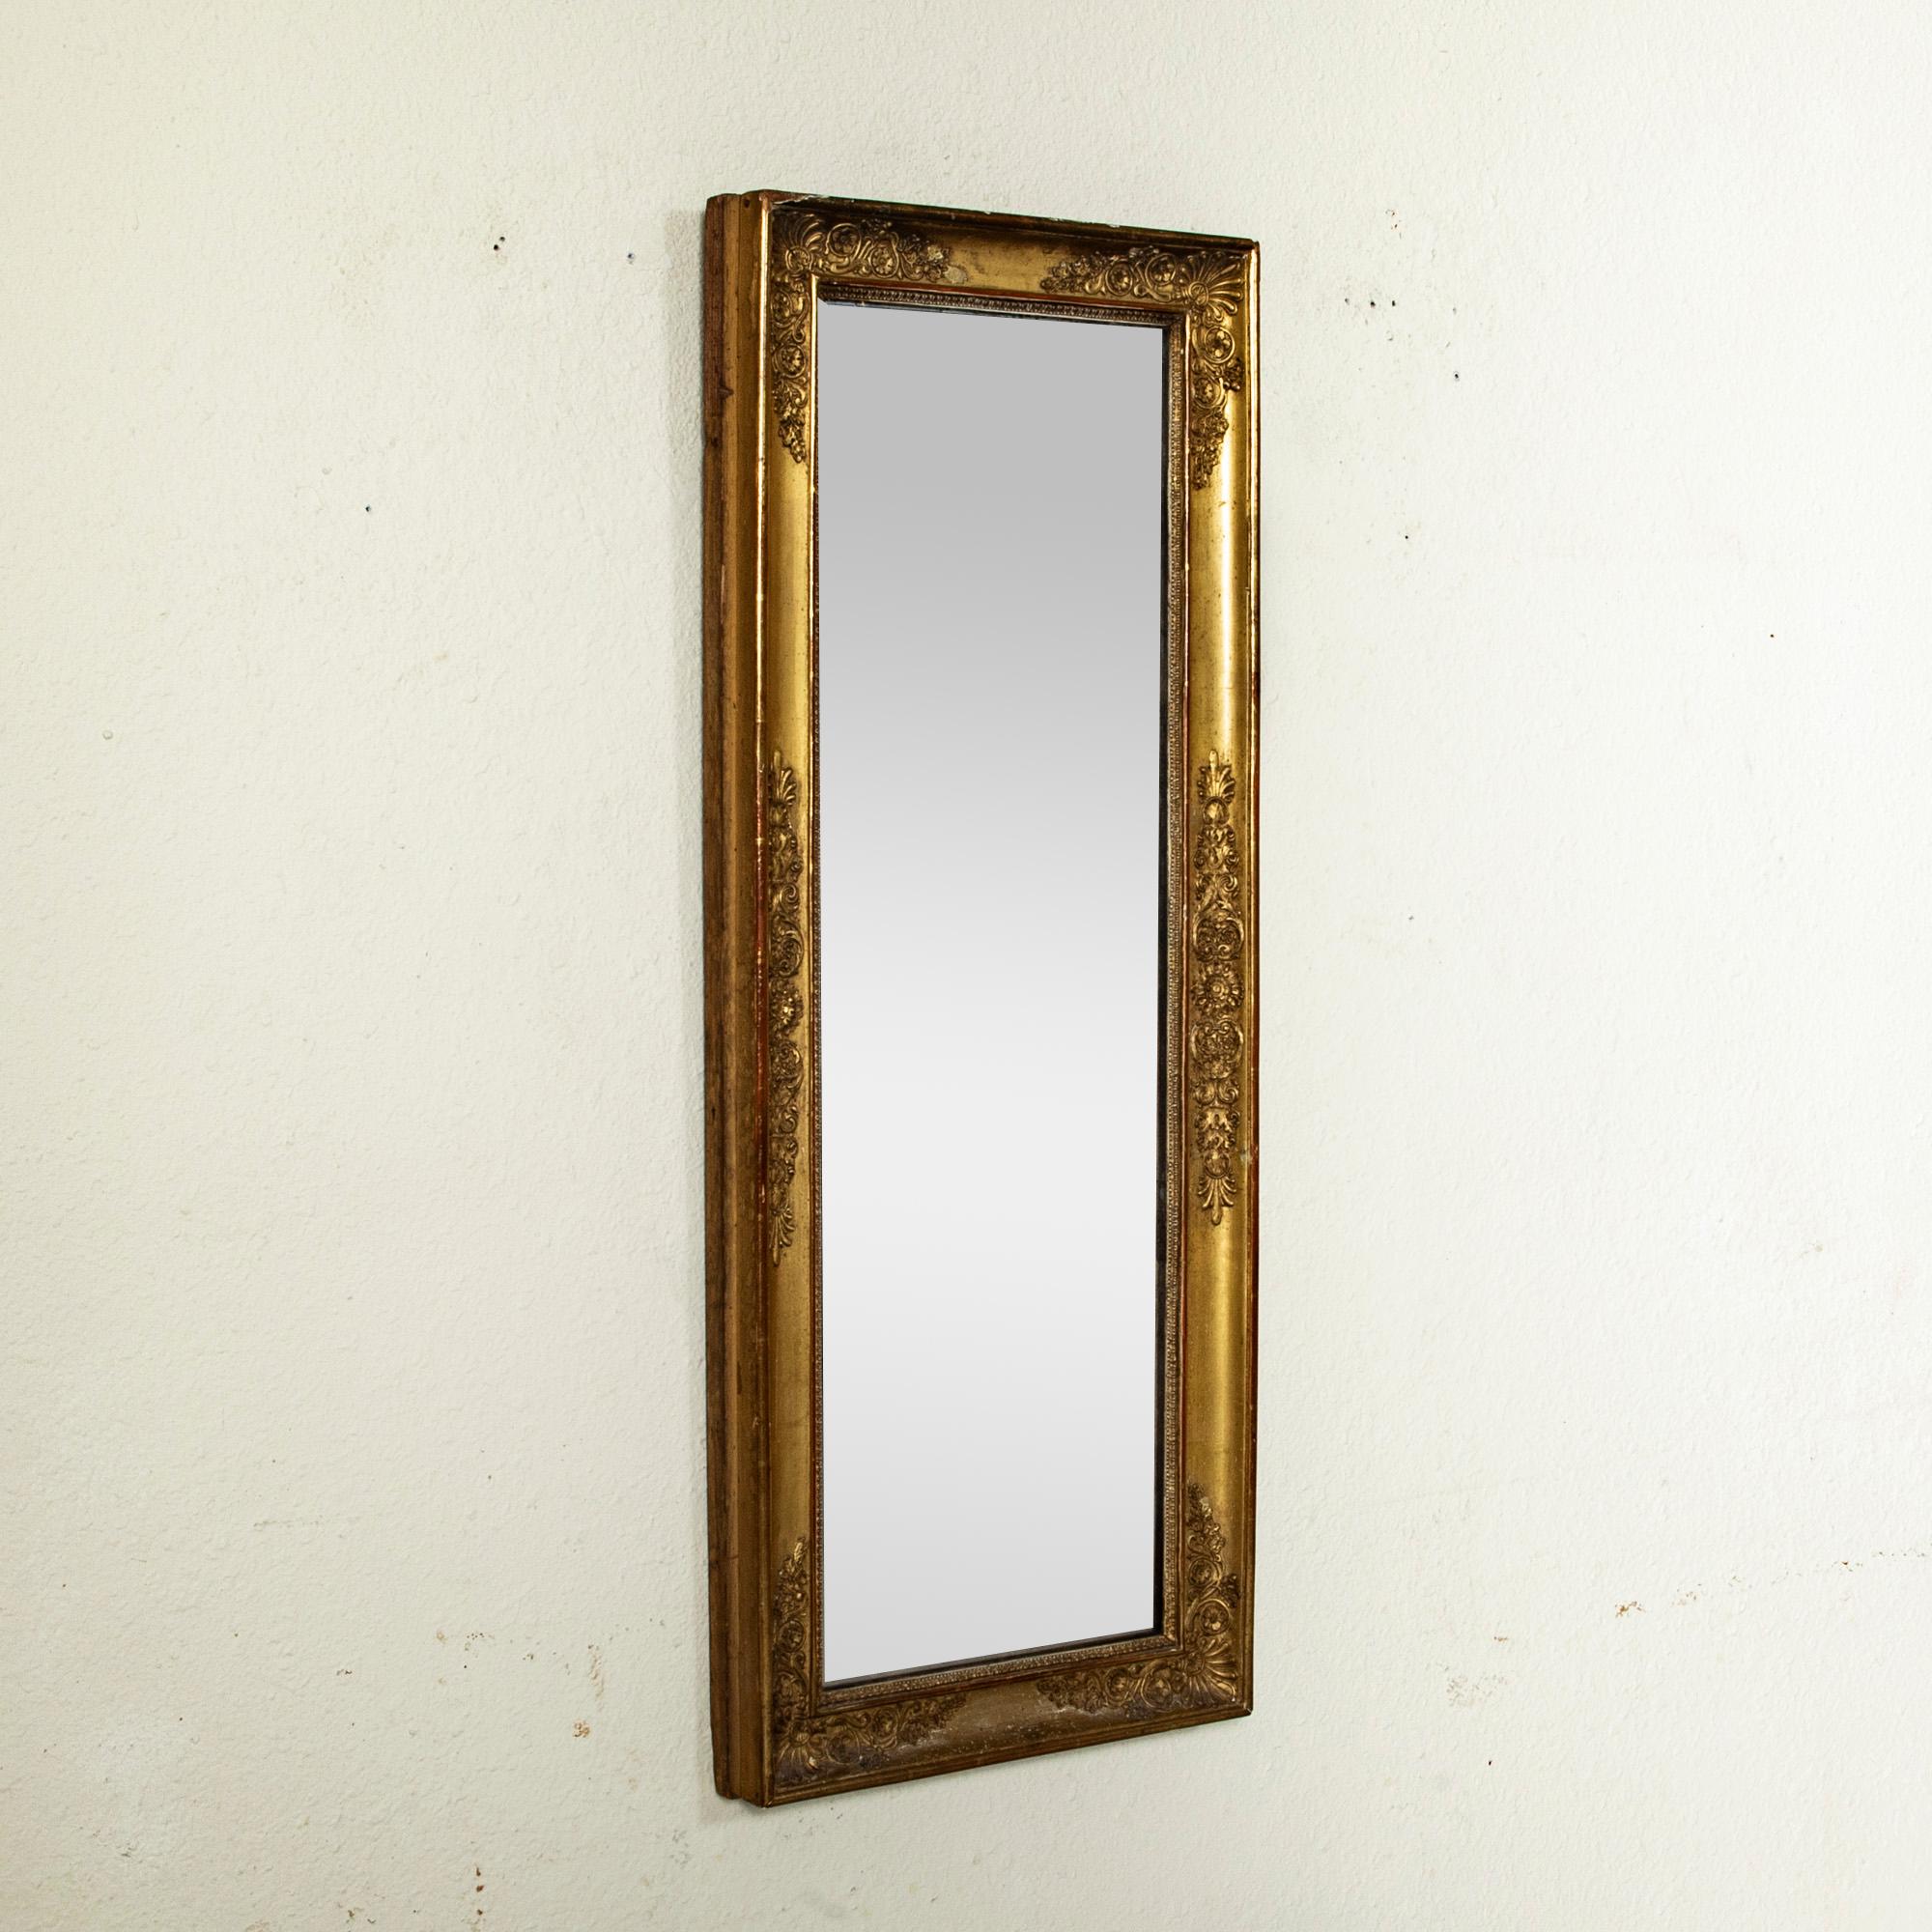 Narrow Early 19th Century French Restauration Period Giltwood Mirror For Sale 1